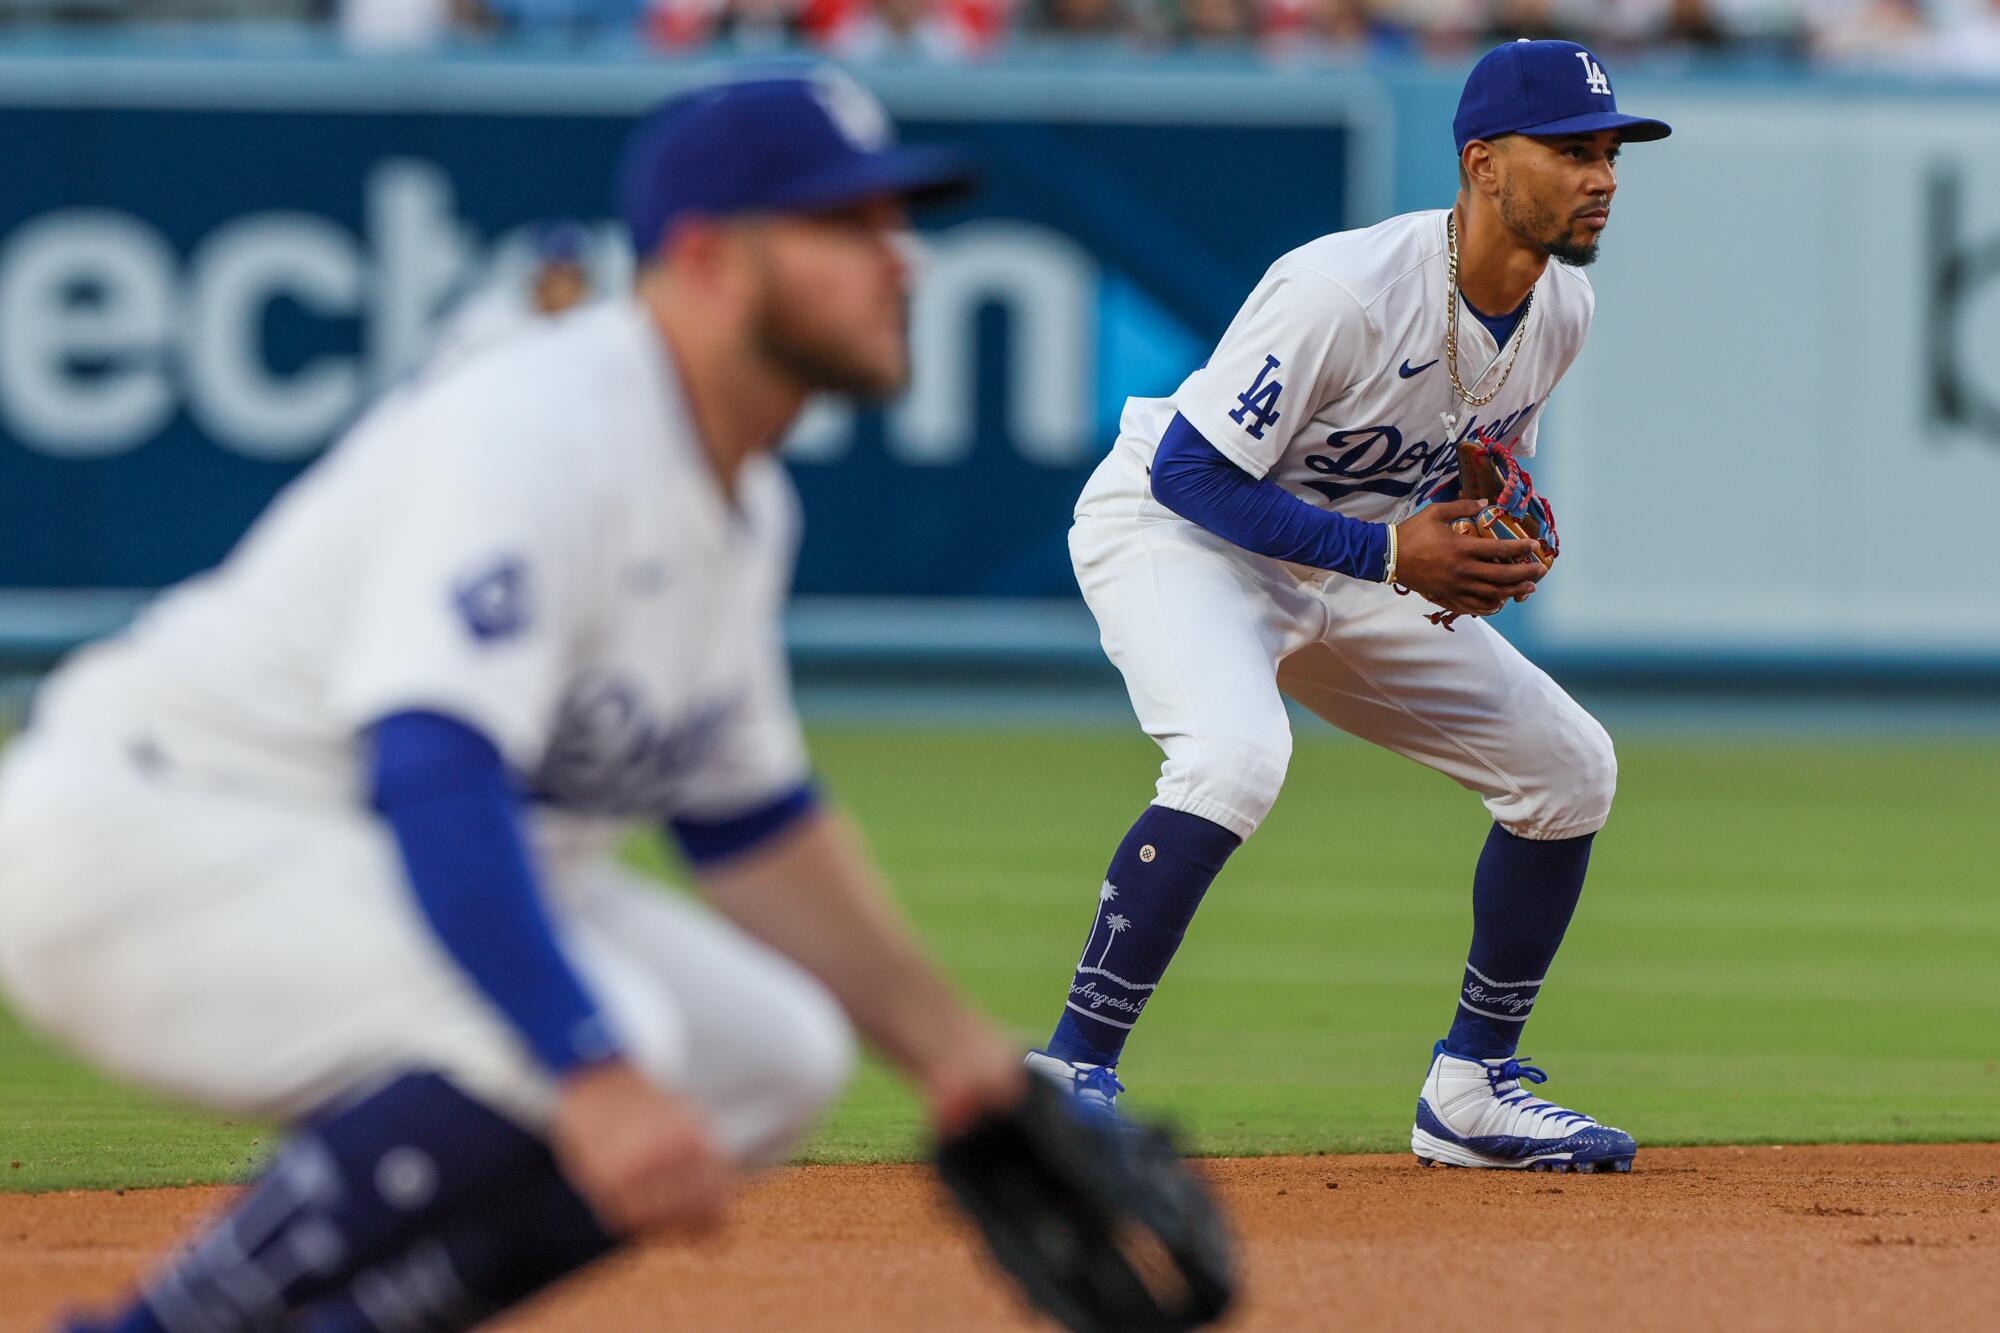 Dodgers shortstop Mookie Betts, right, and third baseman Max Muncy set up defensively before a pitch during a game.